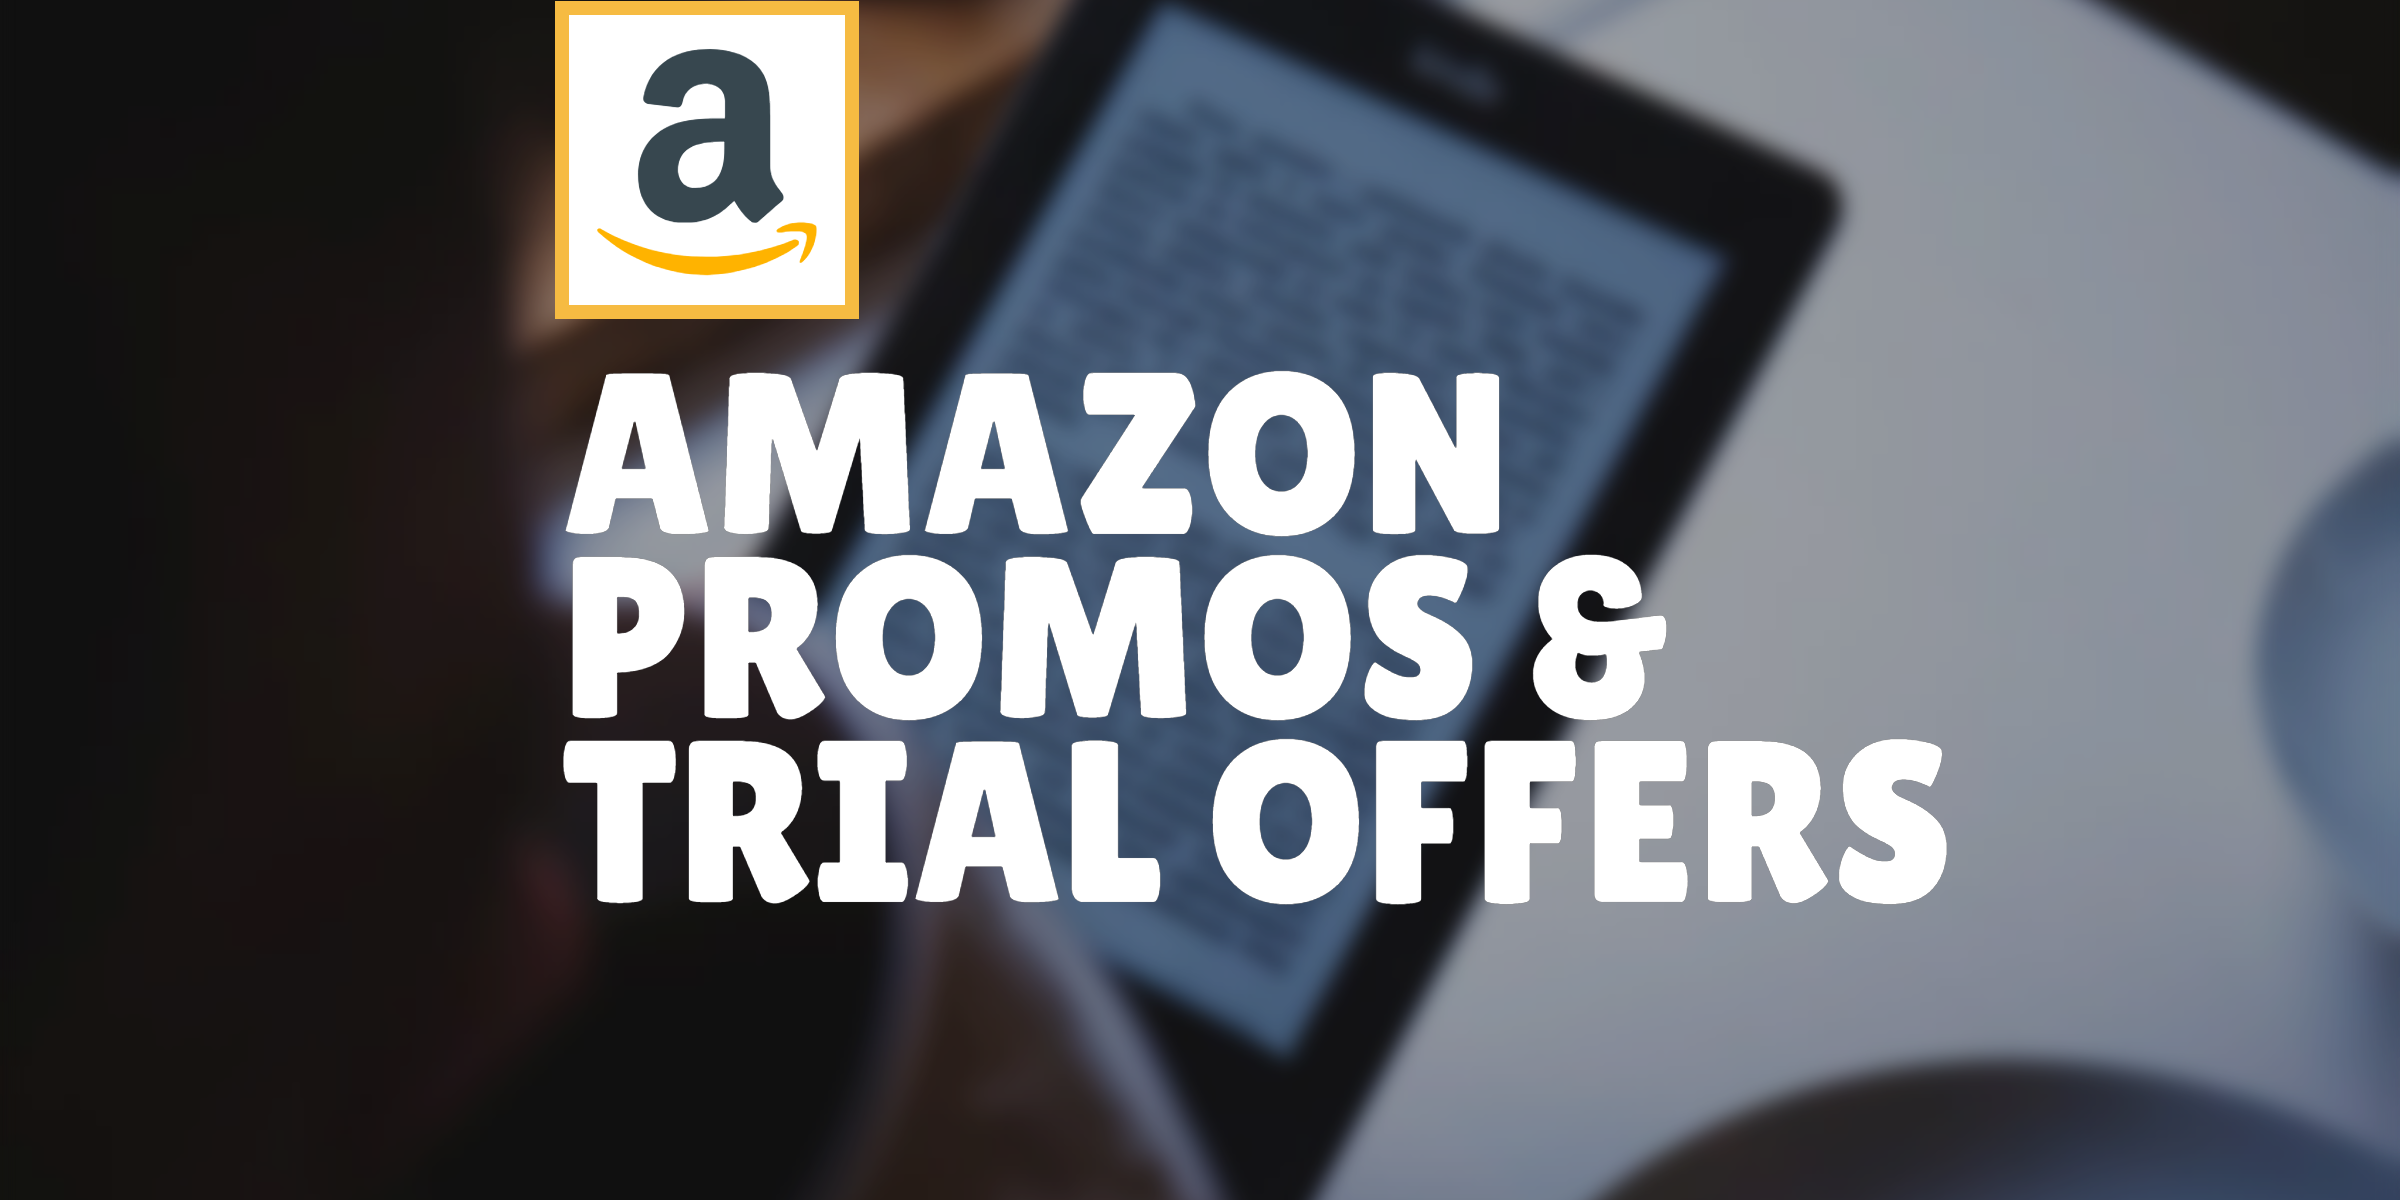 List Of Amazon Free Trials And Promotions Roundup